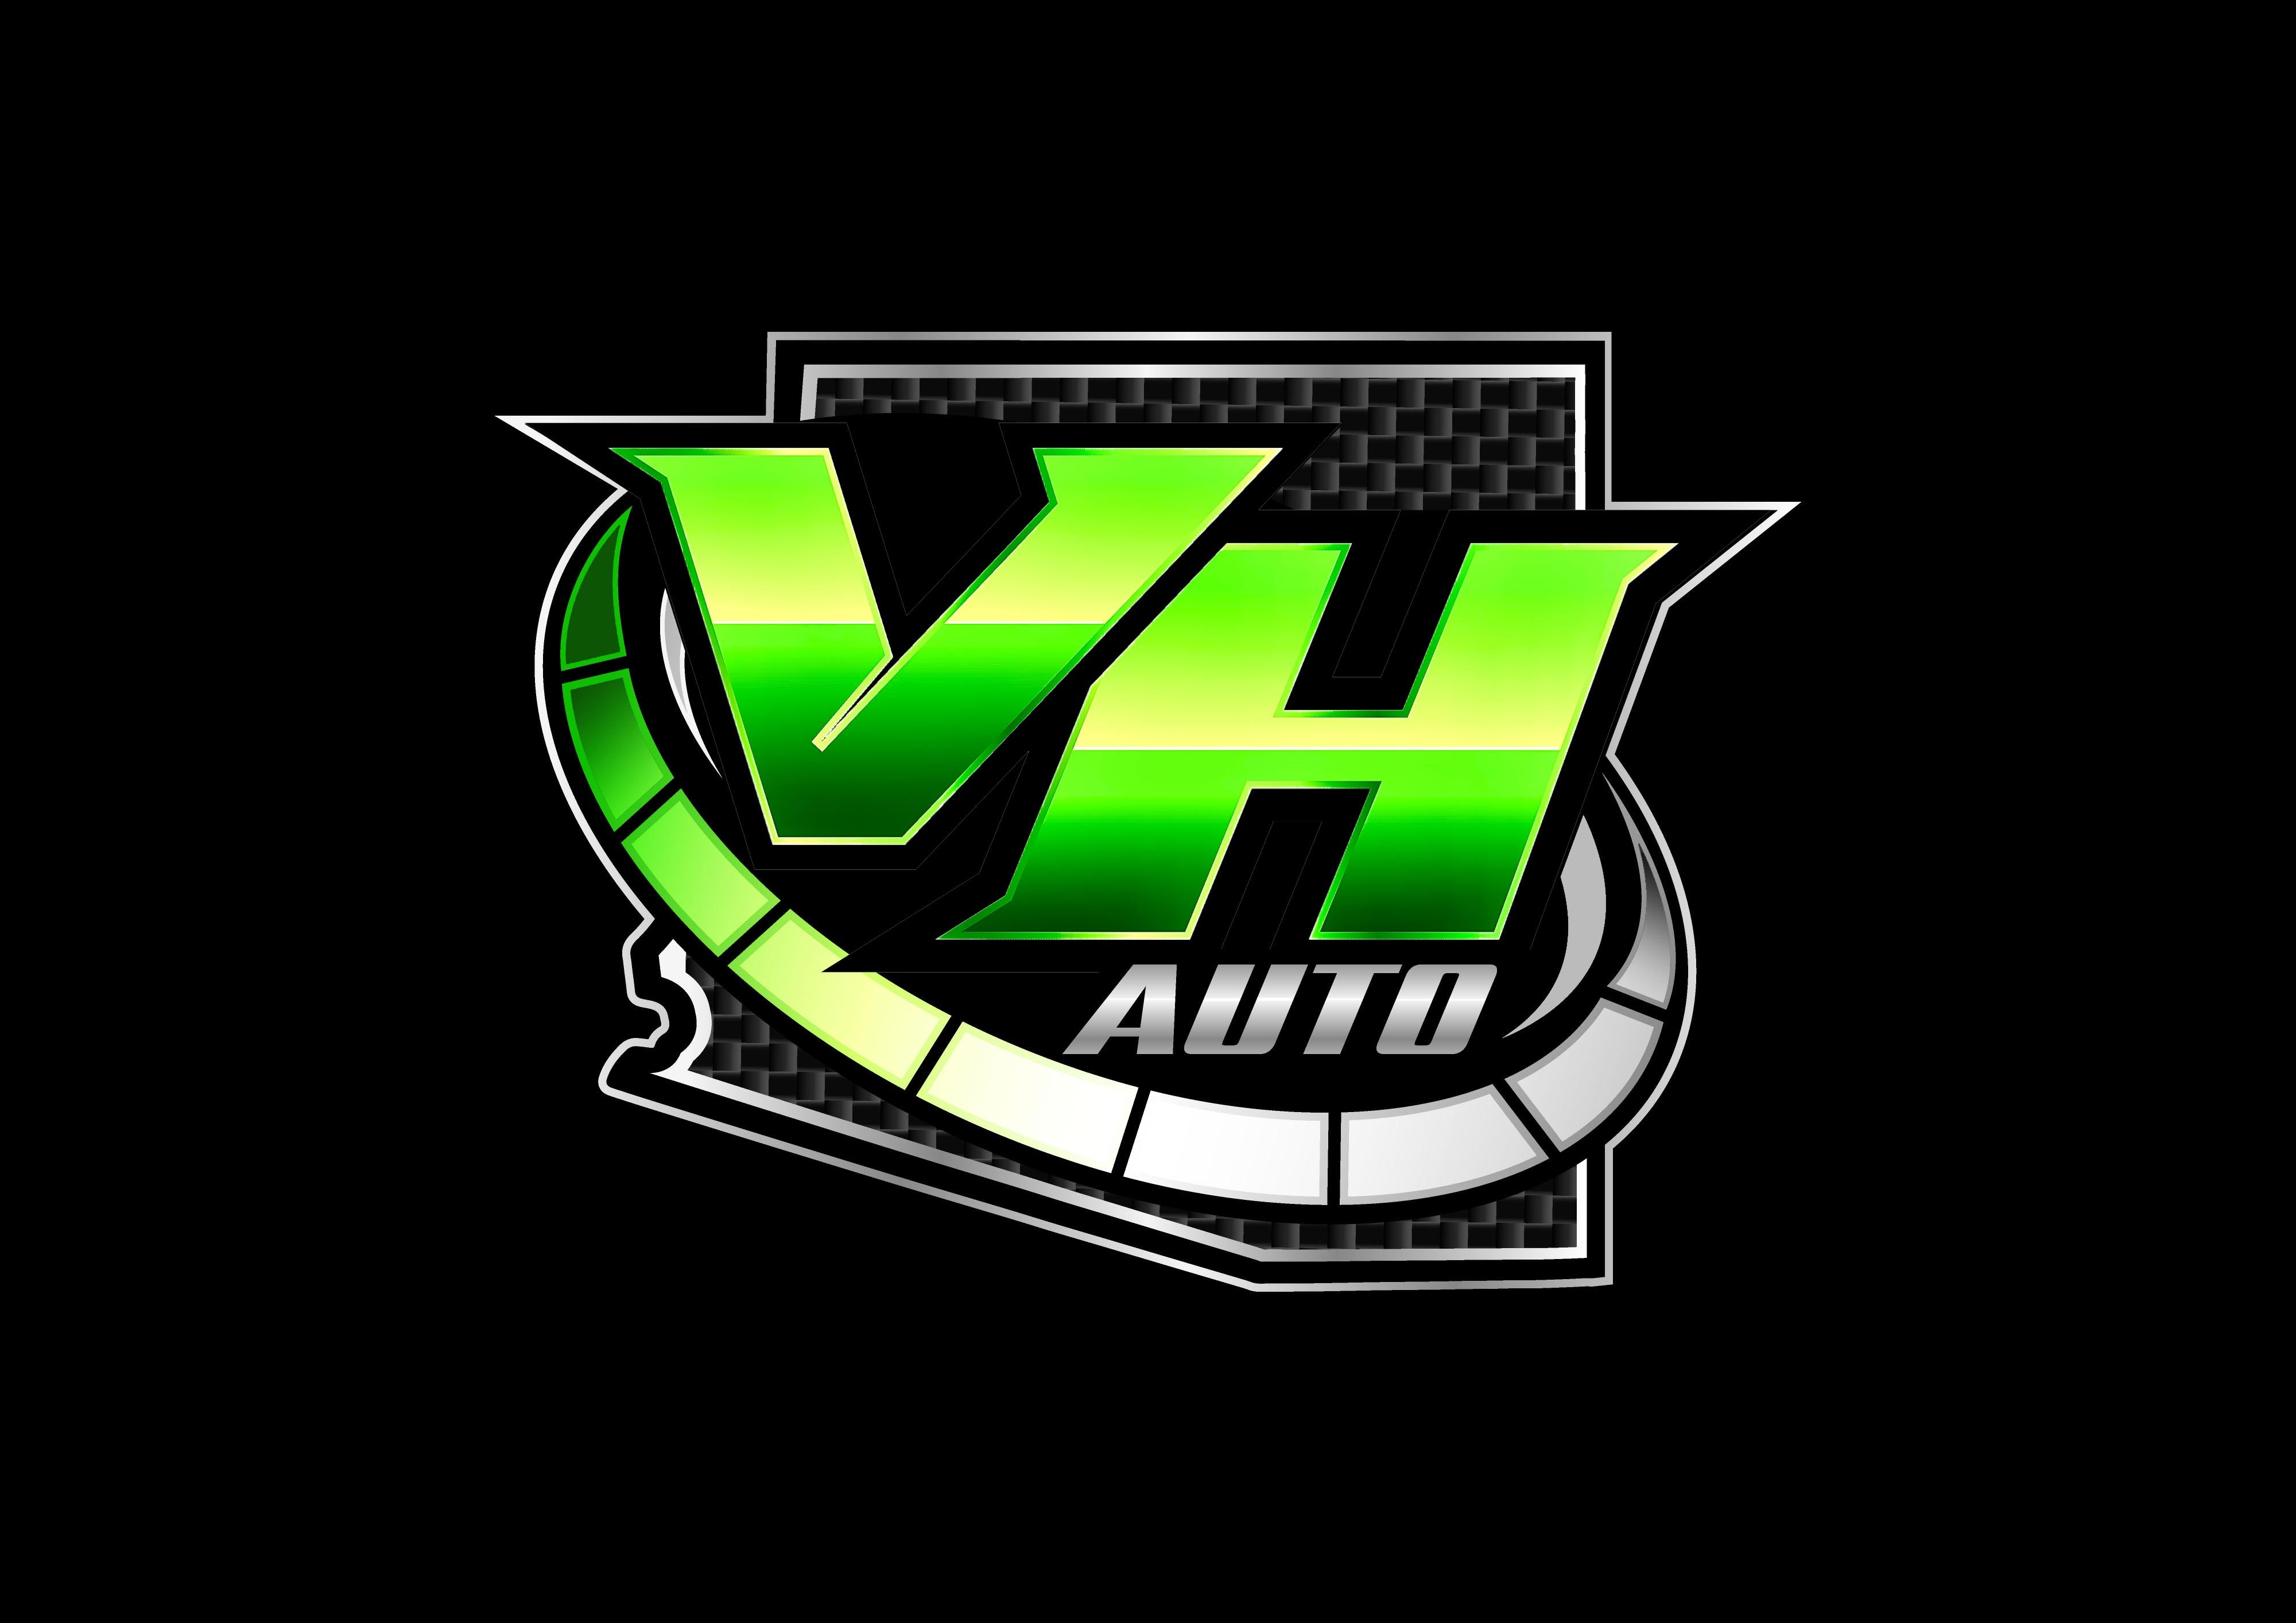 VH Products – Auto